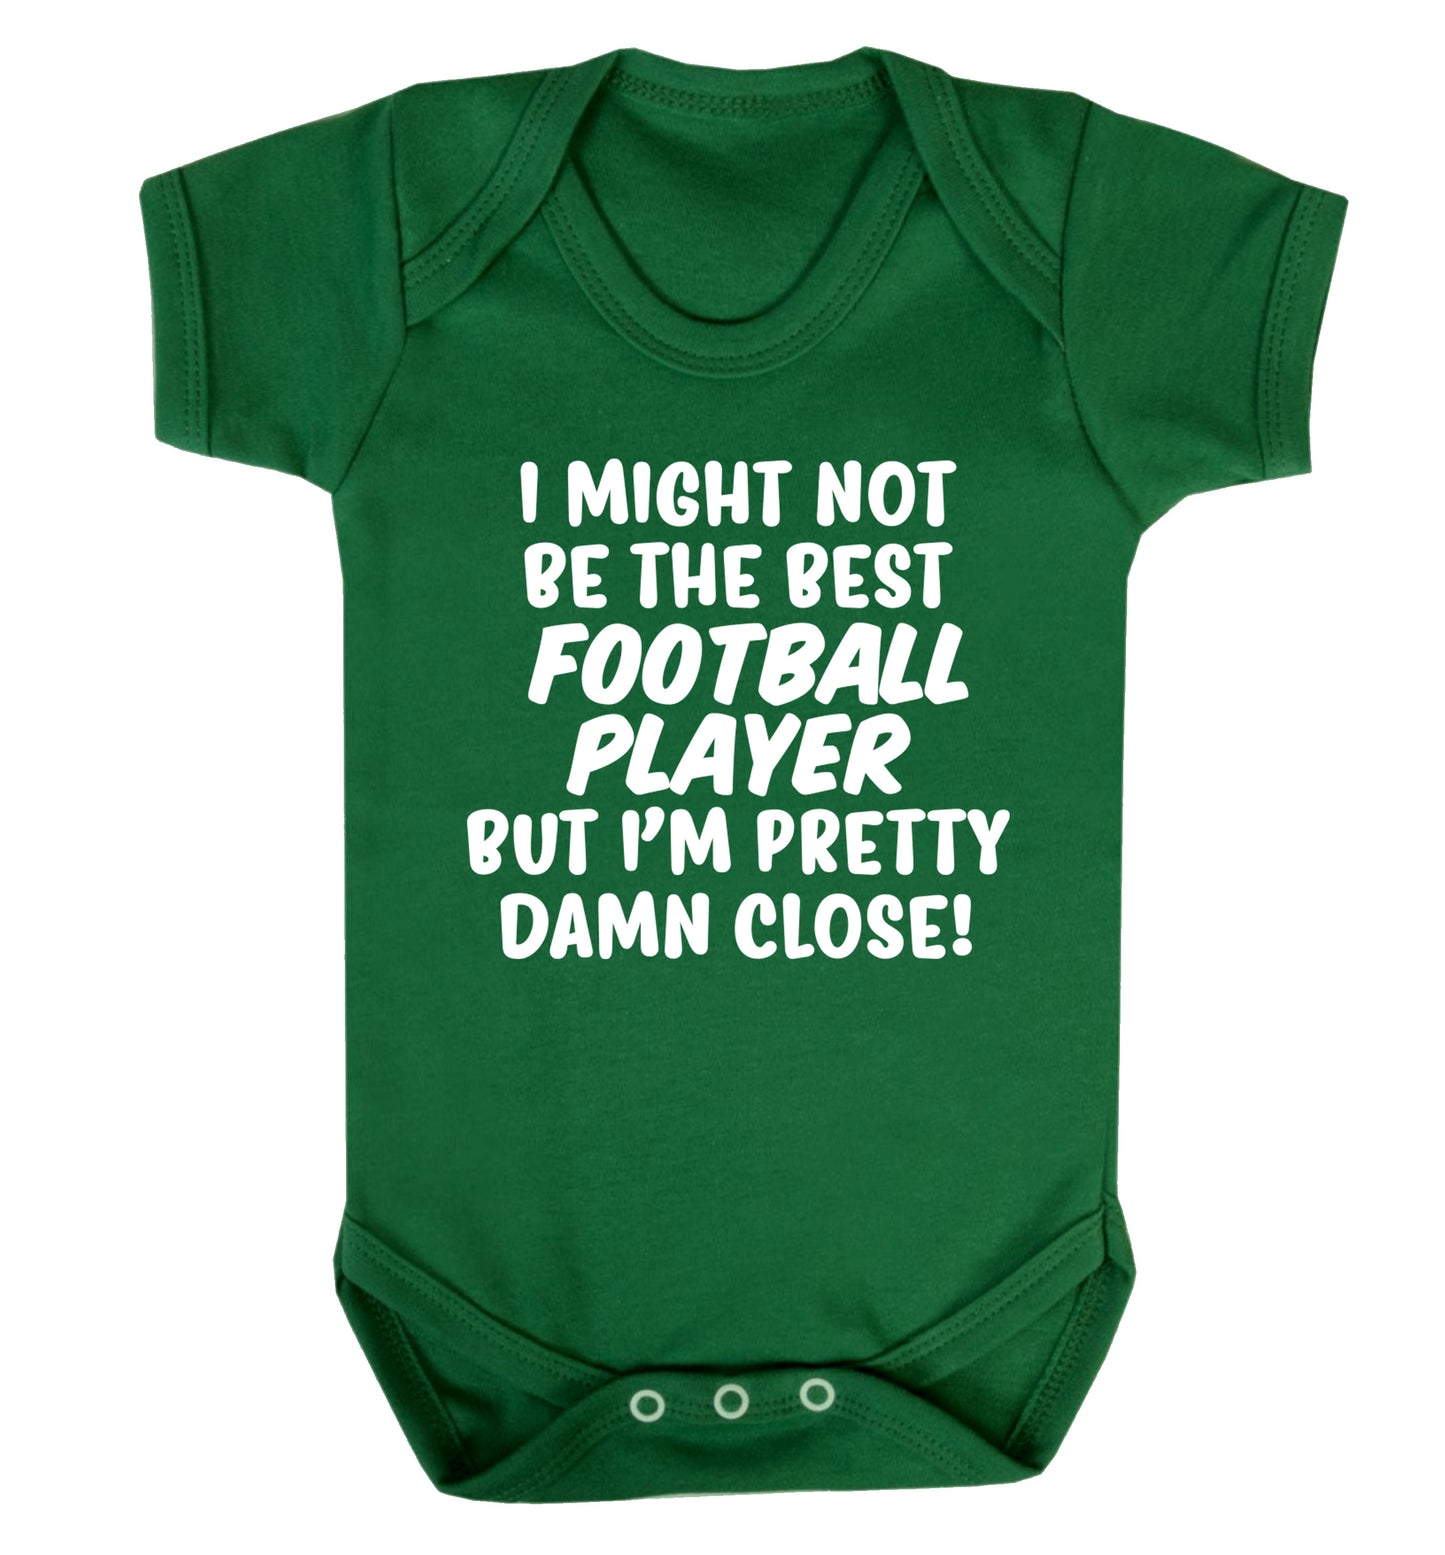 I might not be the best football player but I'm pretty close! Baby Vest green 18-24 months